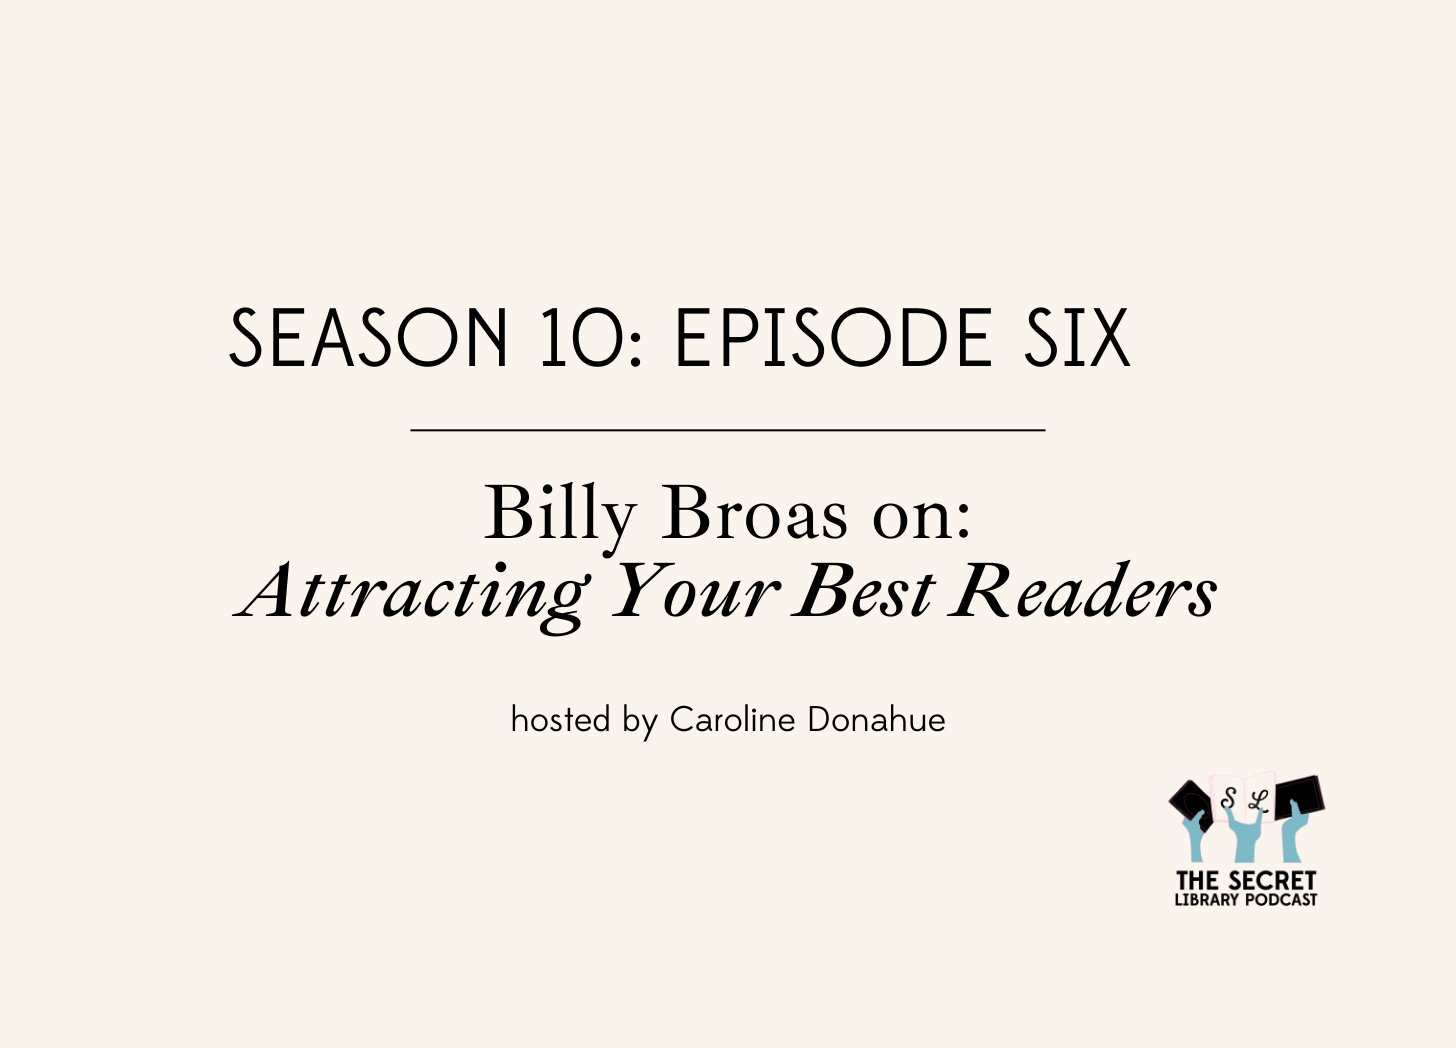 Attracting Your Best Readers with Billy Broas